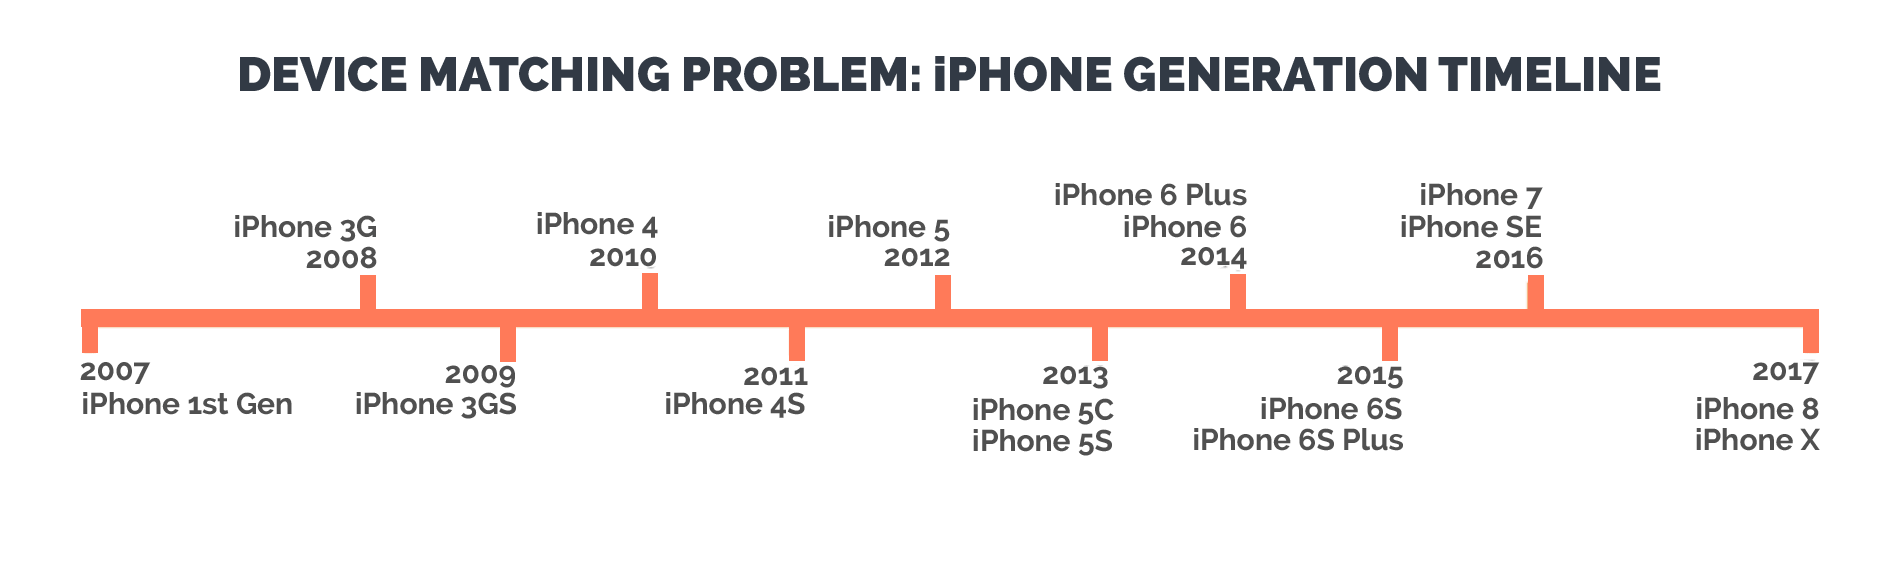 iphone generation timeline proves how difficult it is for wifi networks to keep up with technology